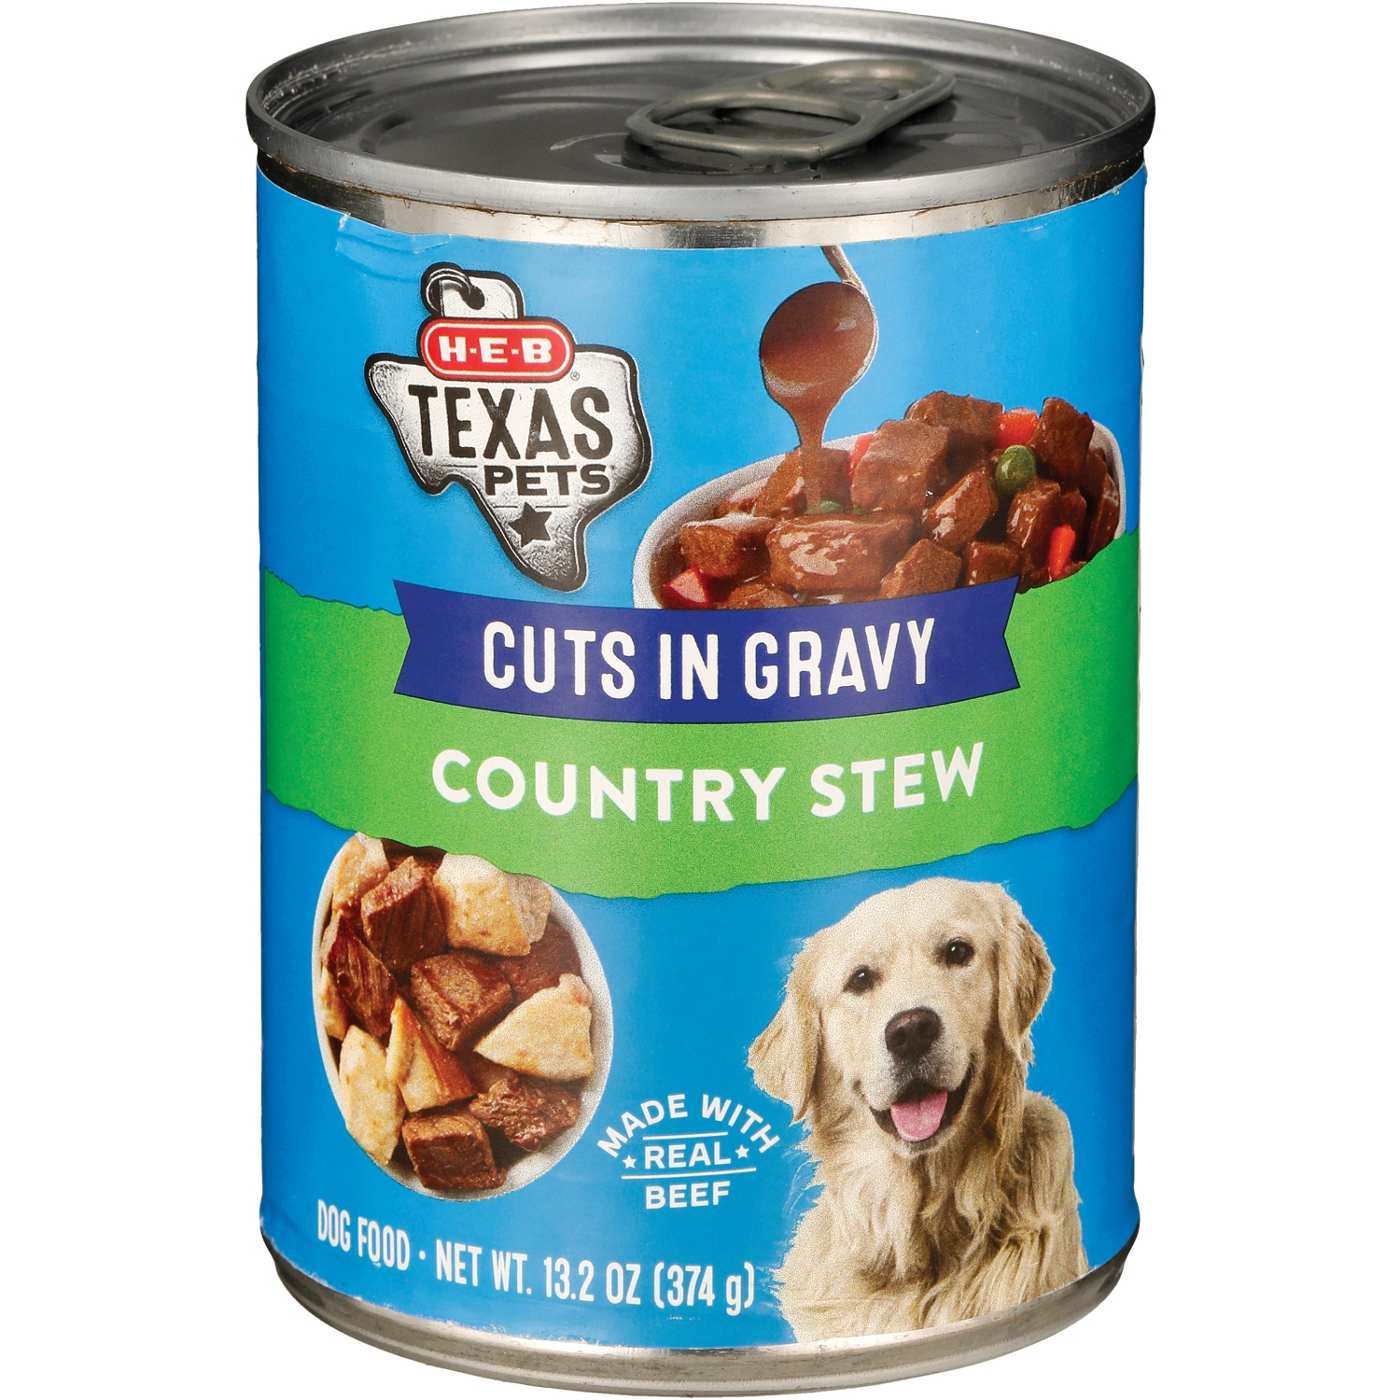 H-E-B Texas Pets Country Stew Wet Dog Food; image 2 of 2